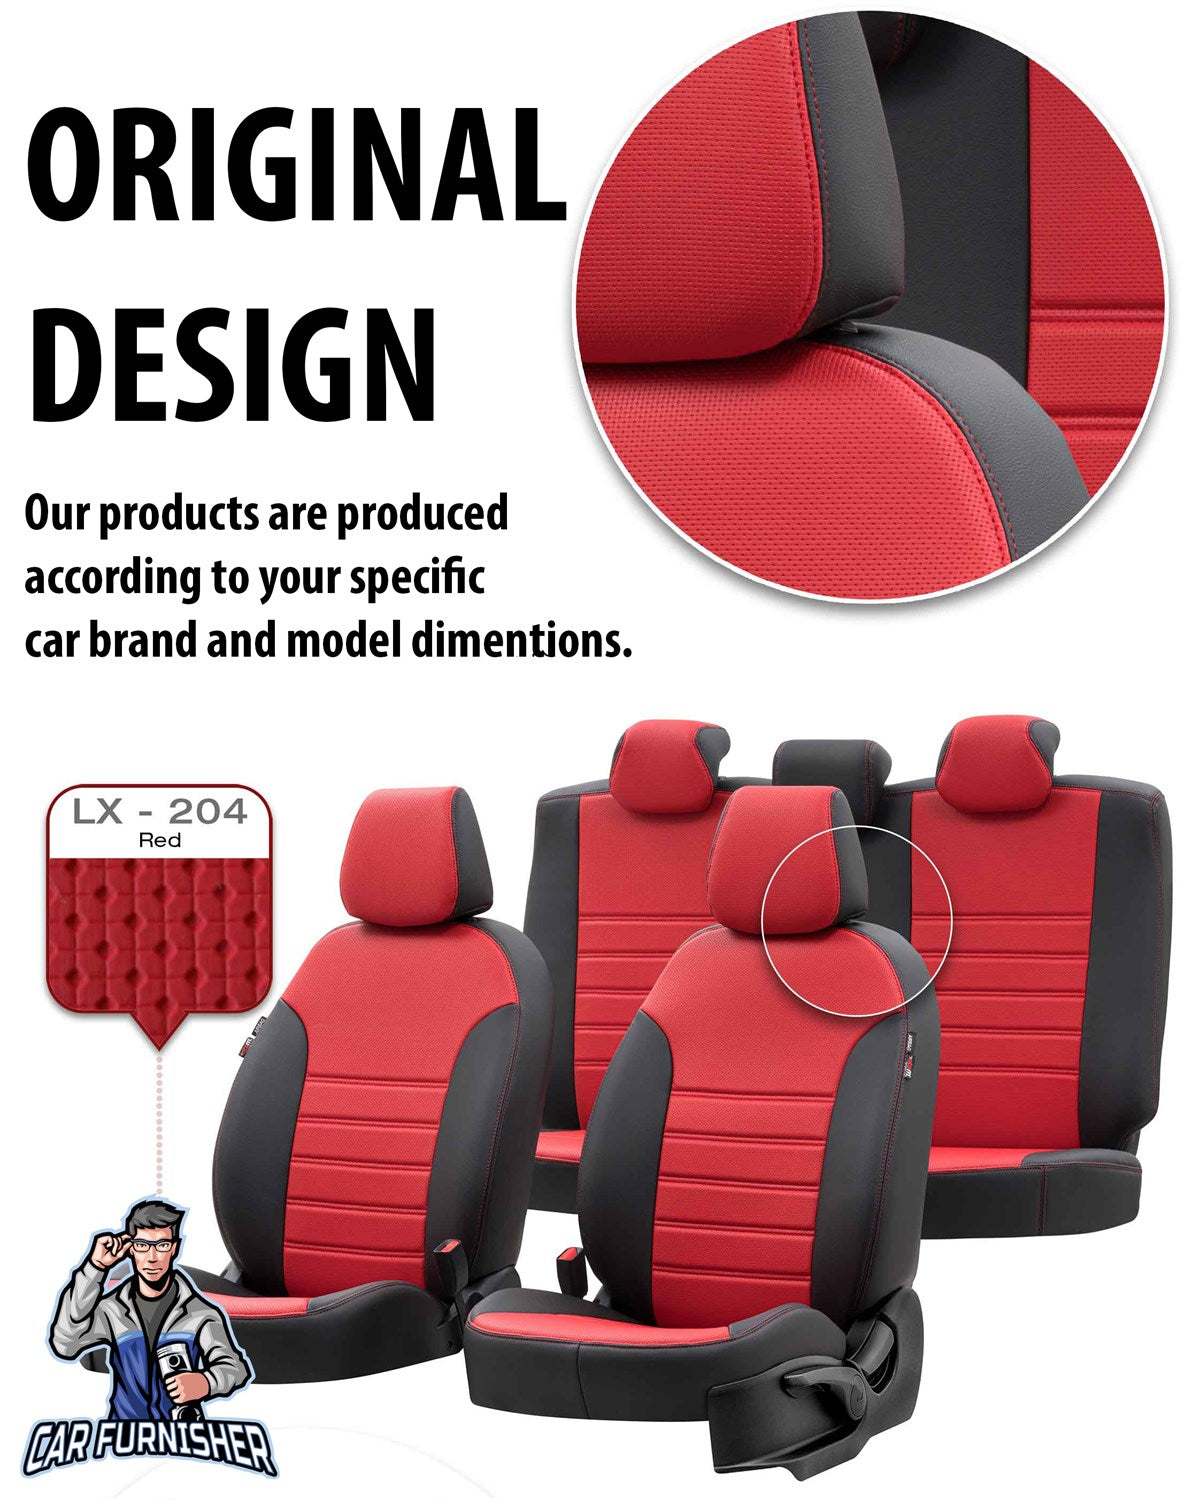 Subaru Forester Seat Cover New York Leather Design Smoked Leather